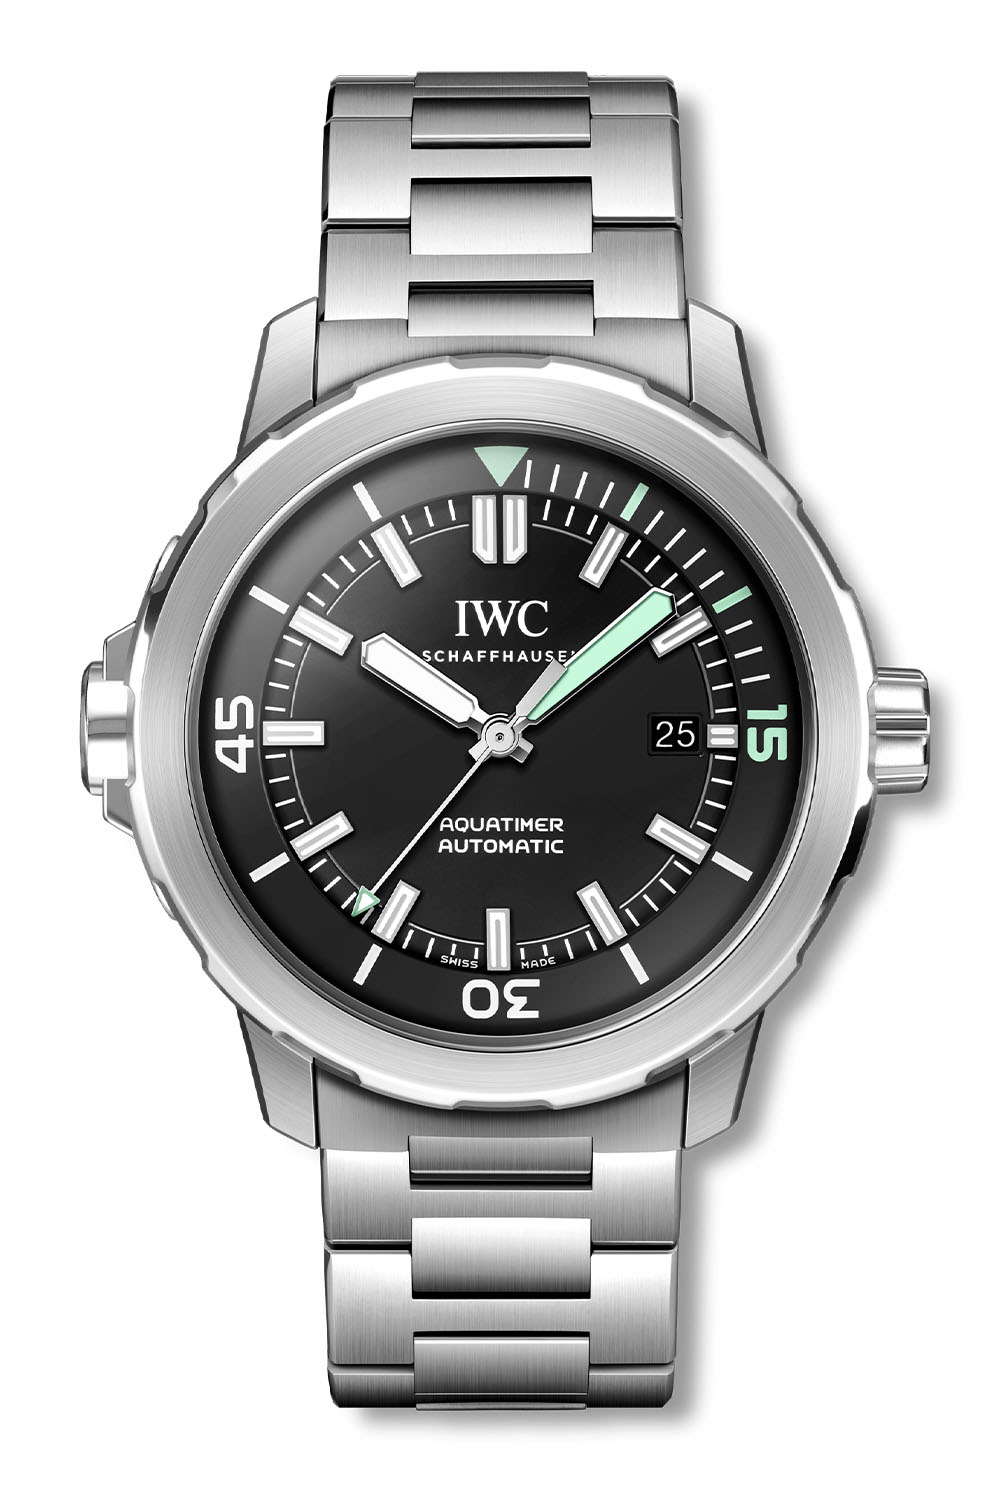 2022 IWC Aquatimer Automatic Collection 5-day Movement - IW328801 IW328802 IW328803